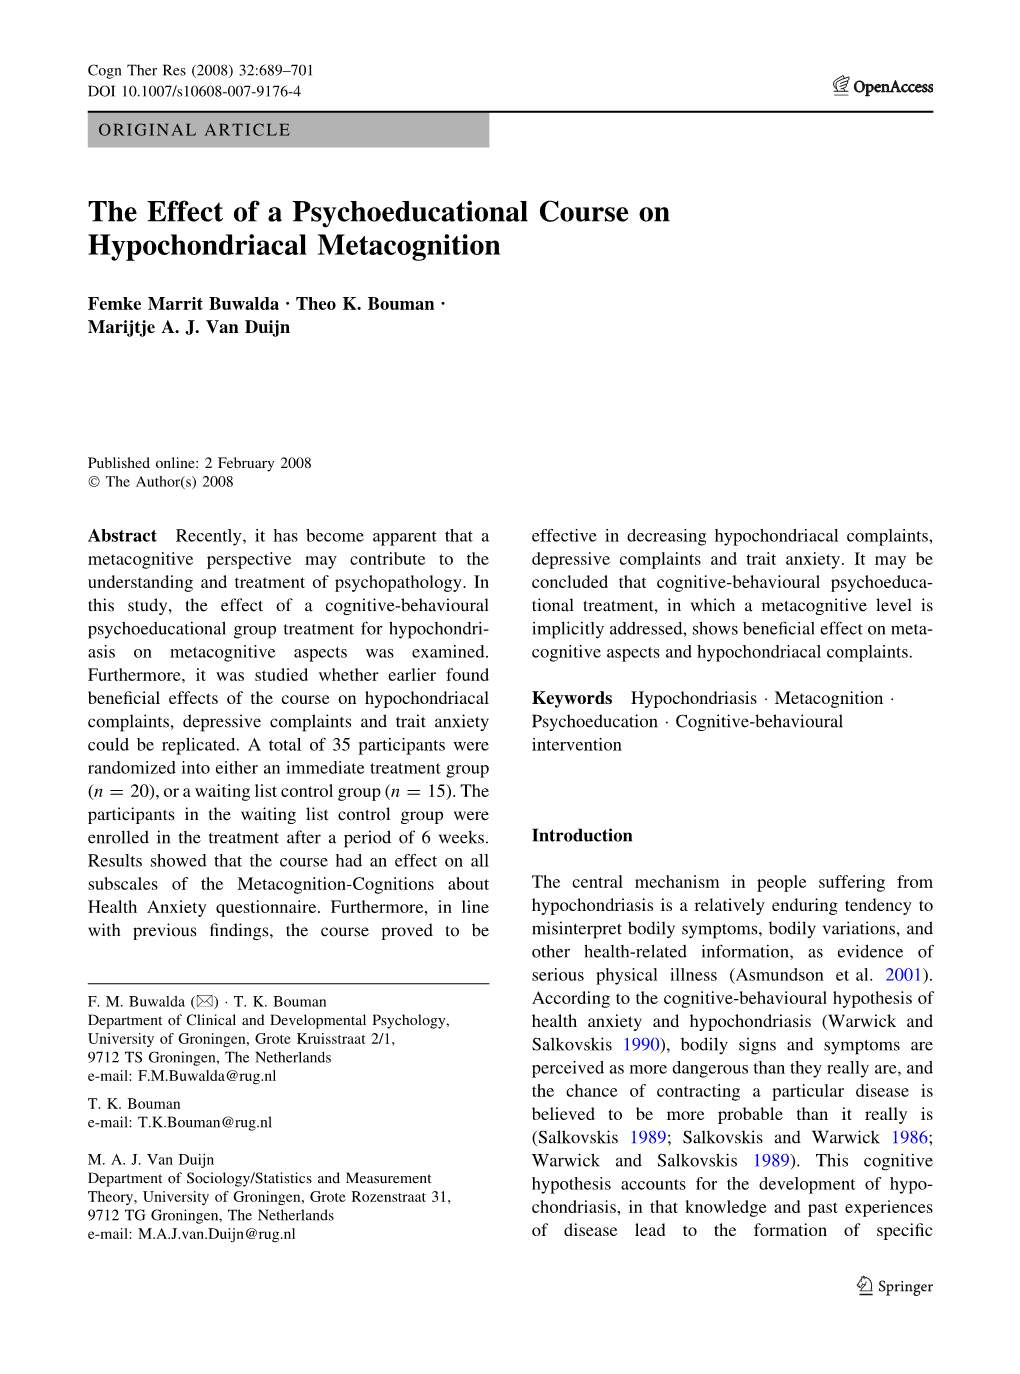 The Effect of a Psychoeducational Course on Hypochondriacal Metacognition